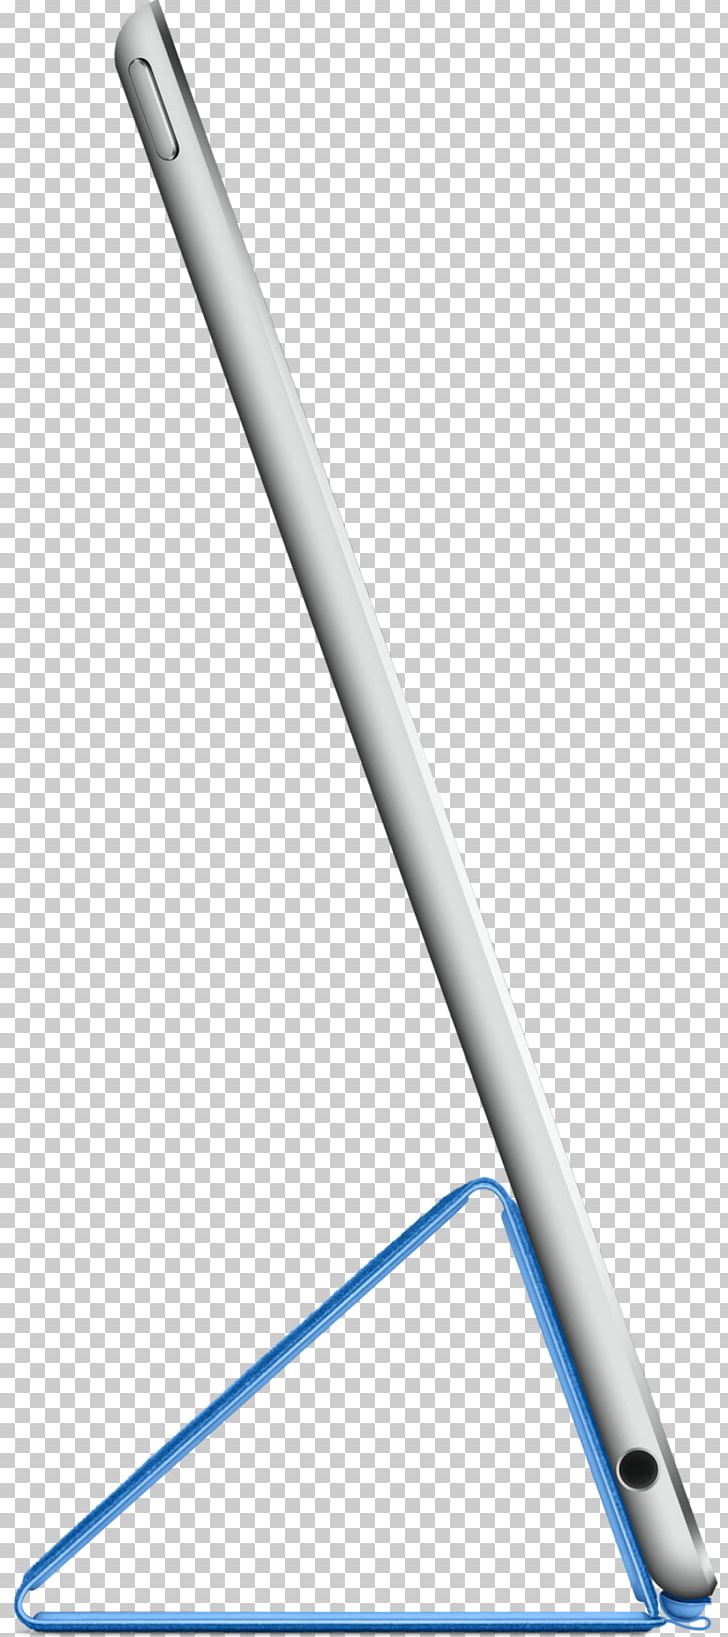 IPad Air 2 Apple Computer Keynote Input/output PNG, Clipart, Angle, Apple, Apple Ipad Air, Computer, Computer Accessory Free PNG Download